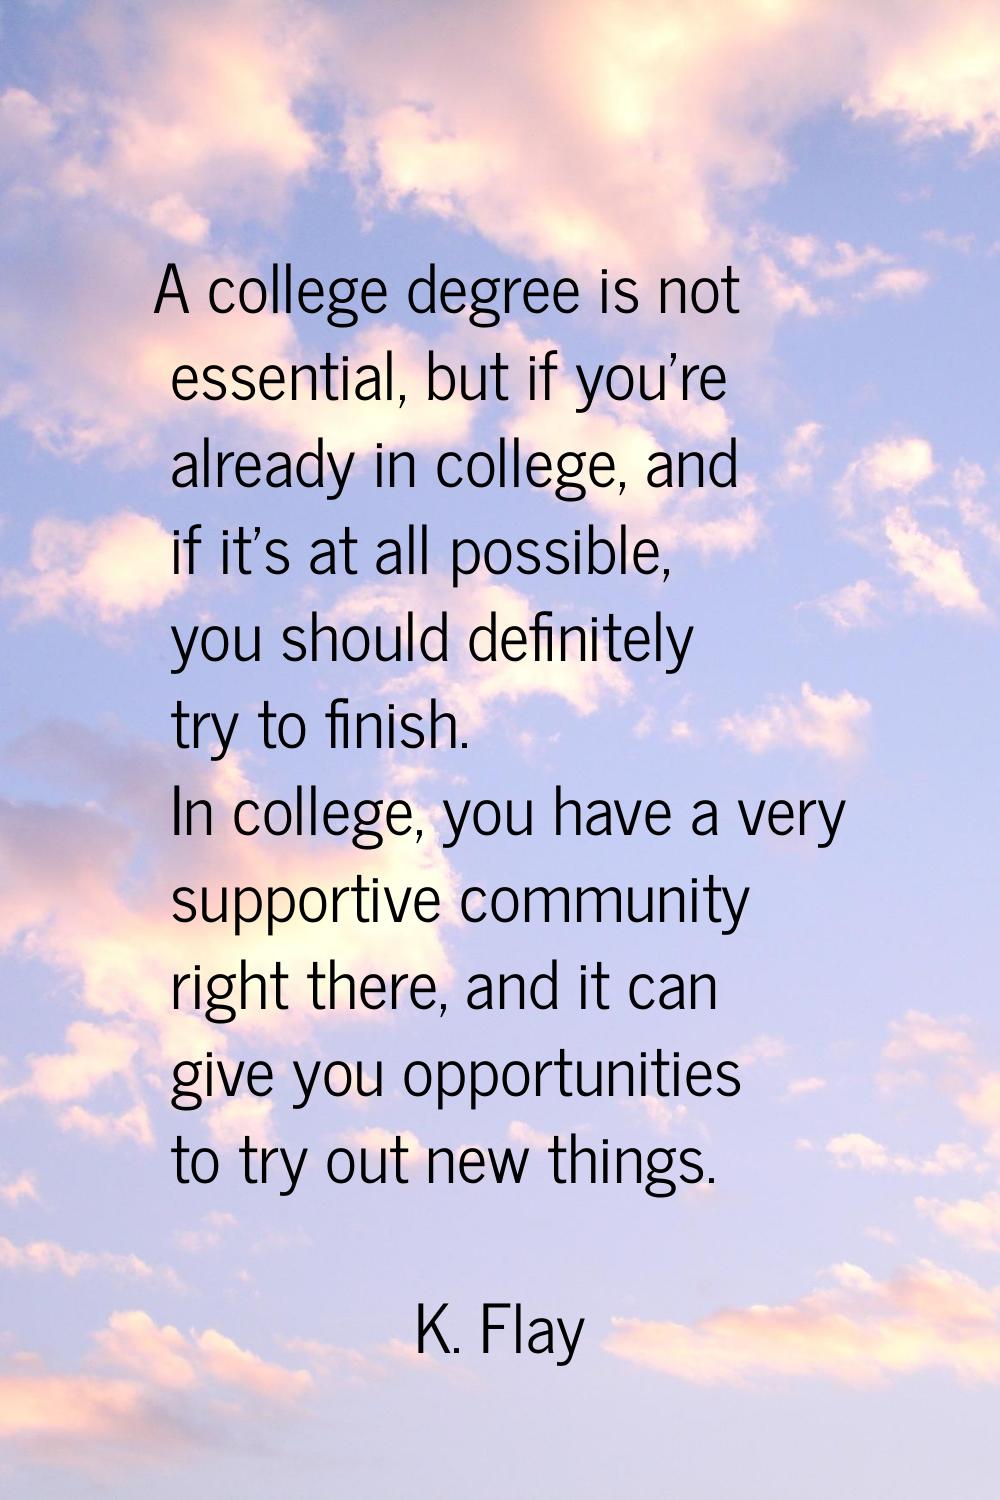 A college degree is not essential, but if you're already in college, and if it's at all possible, y